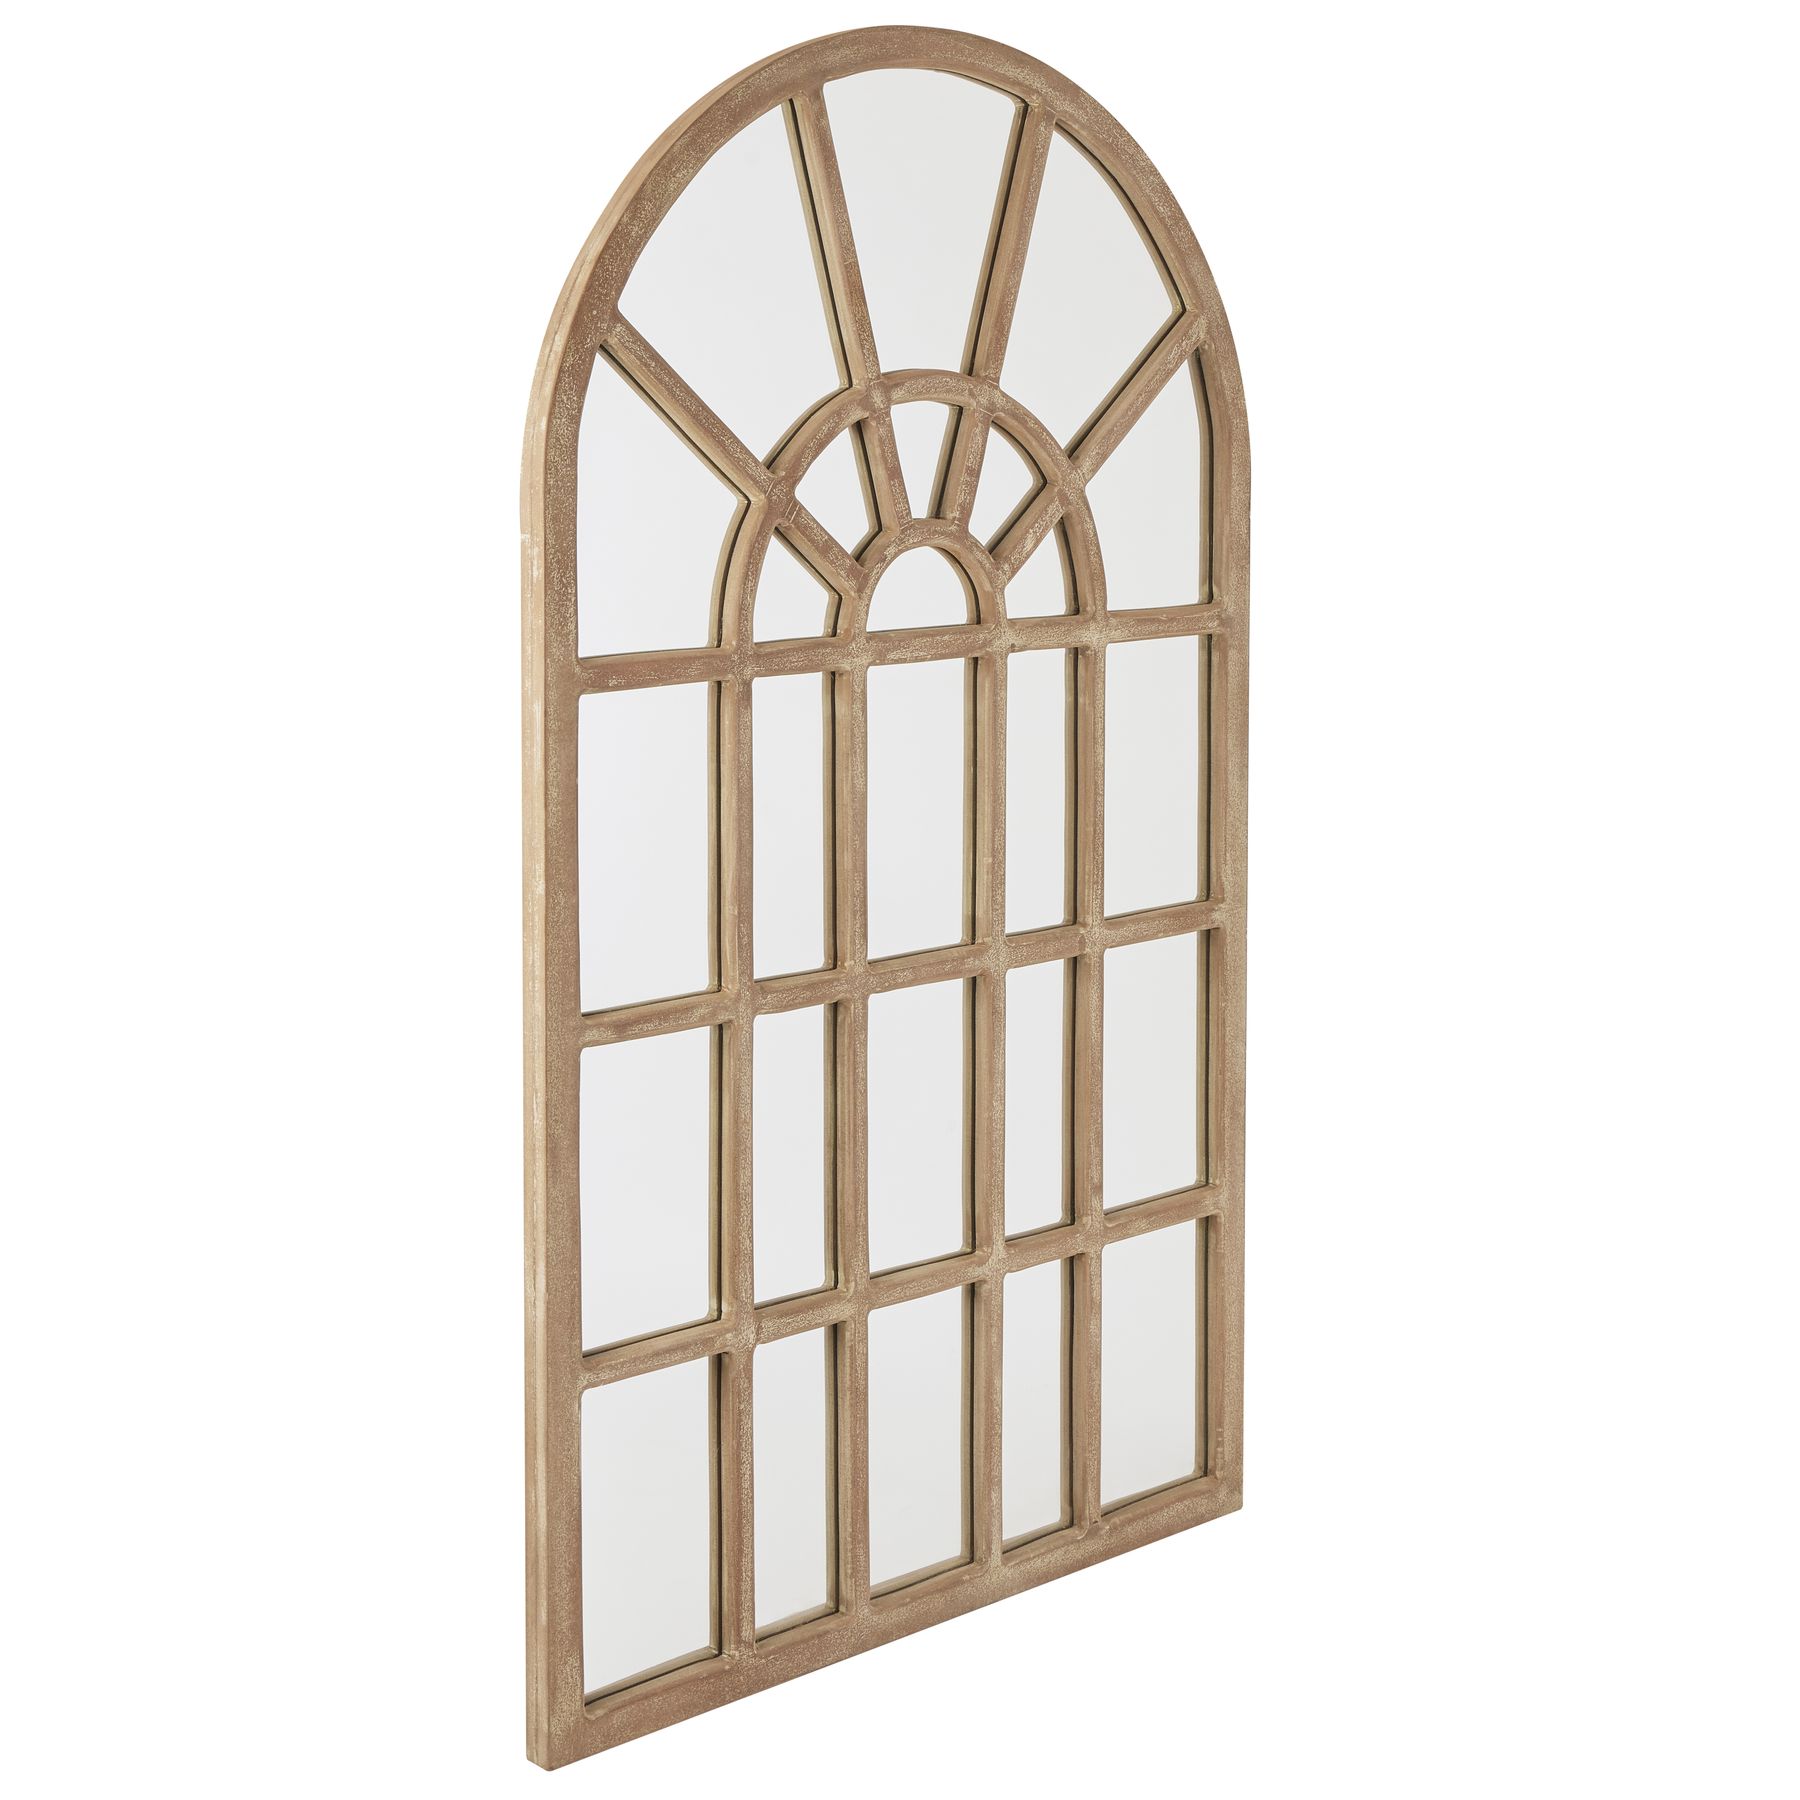 Copgrove Collection Arched Paned Wall Mirror - Image 1